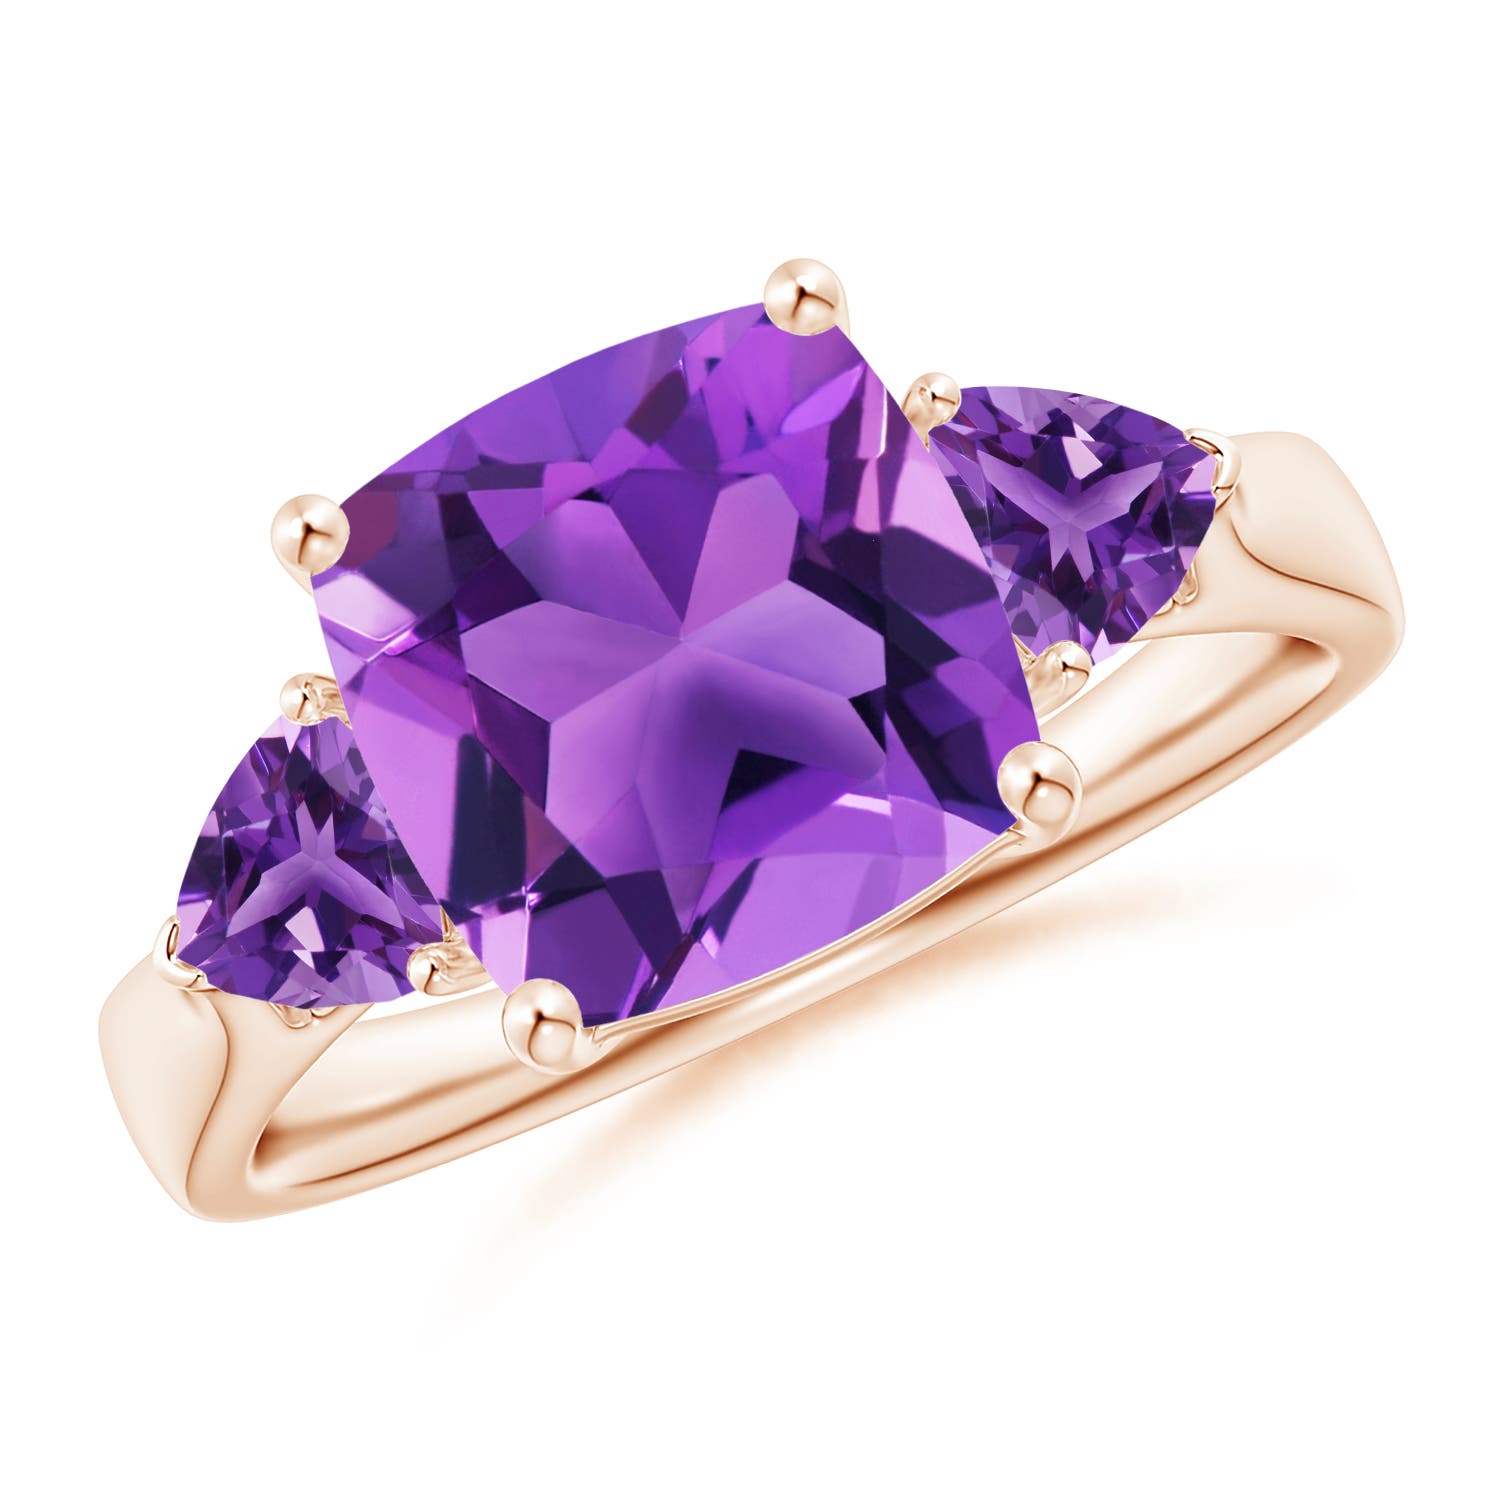 AAA - Amethyst / 3.9 CT / 14 KT Rose Gold